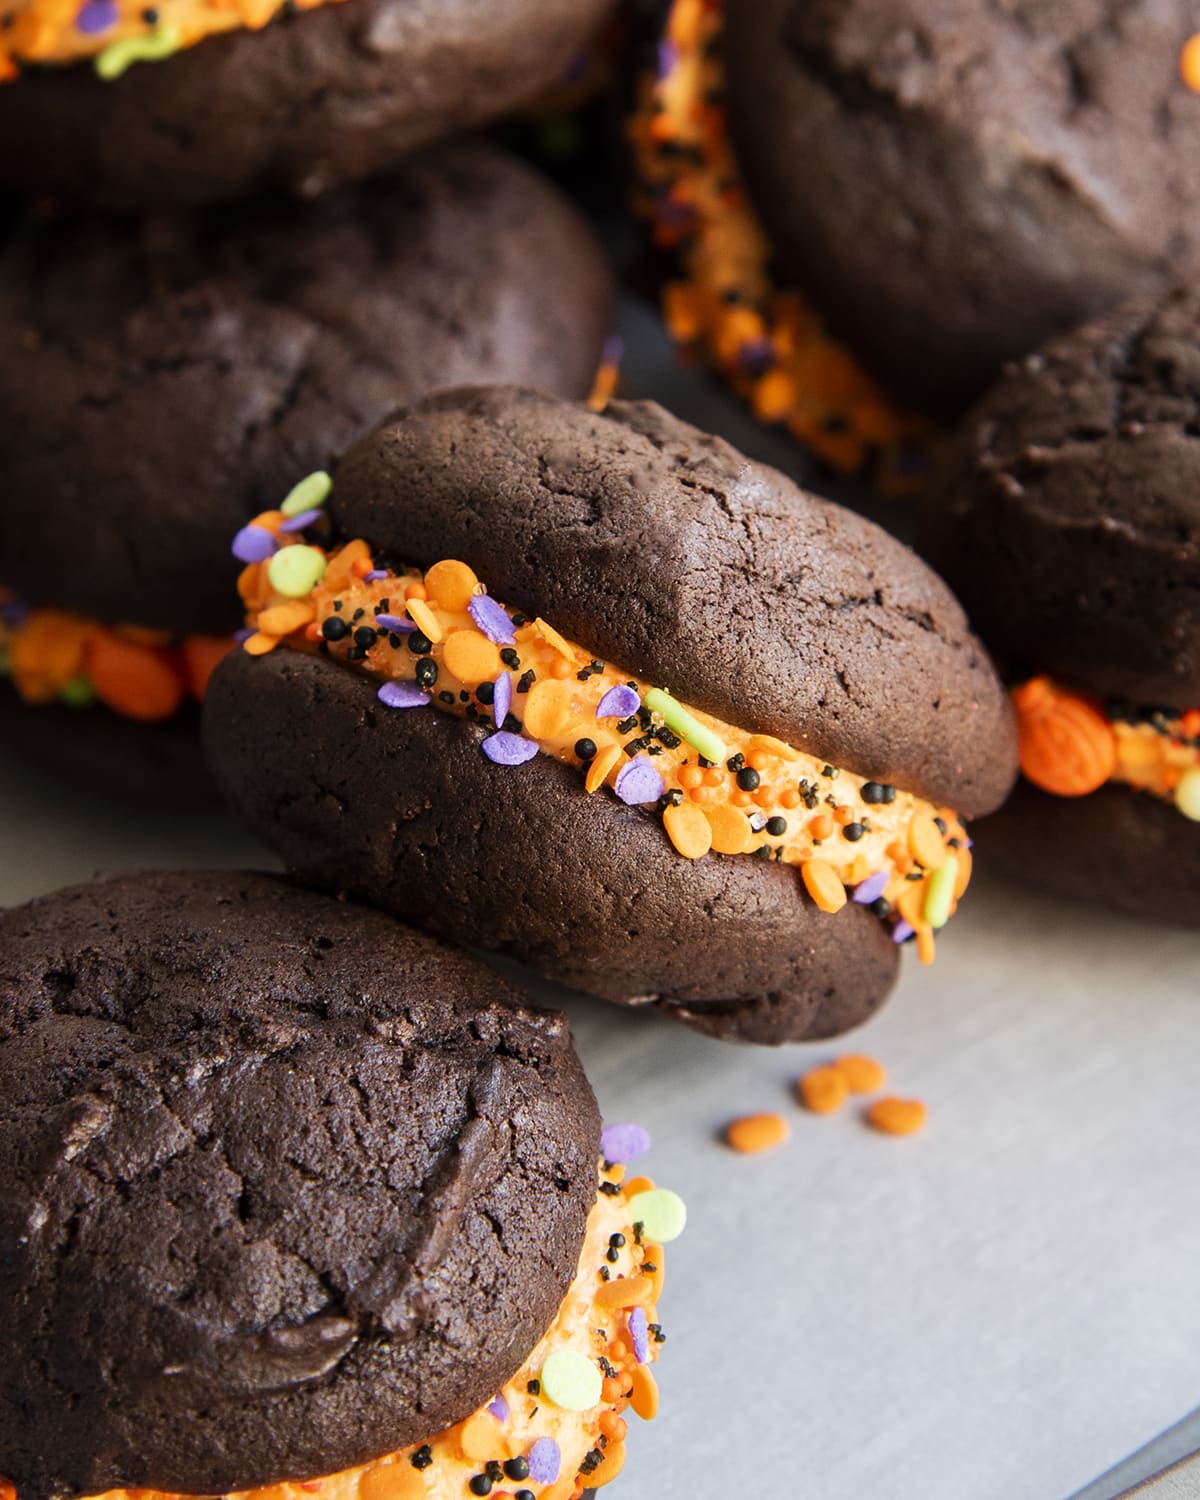 A chocolate cookie sandwich with orange frosting and orange sprinkles in the middle.